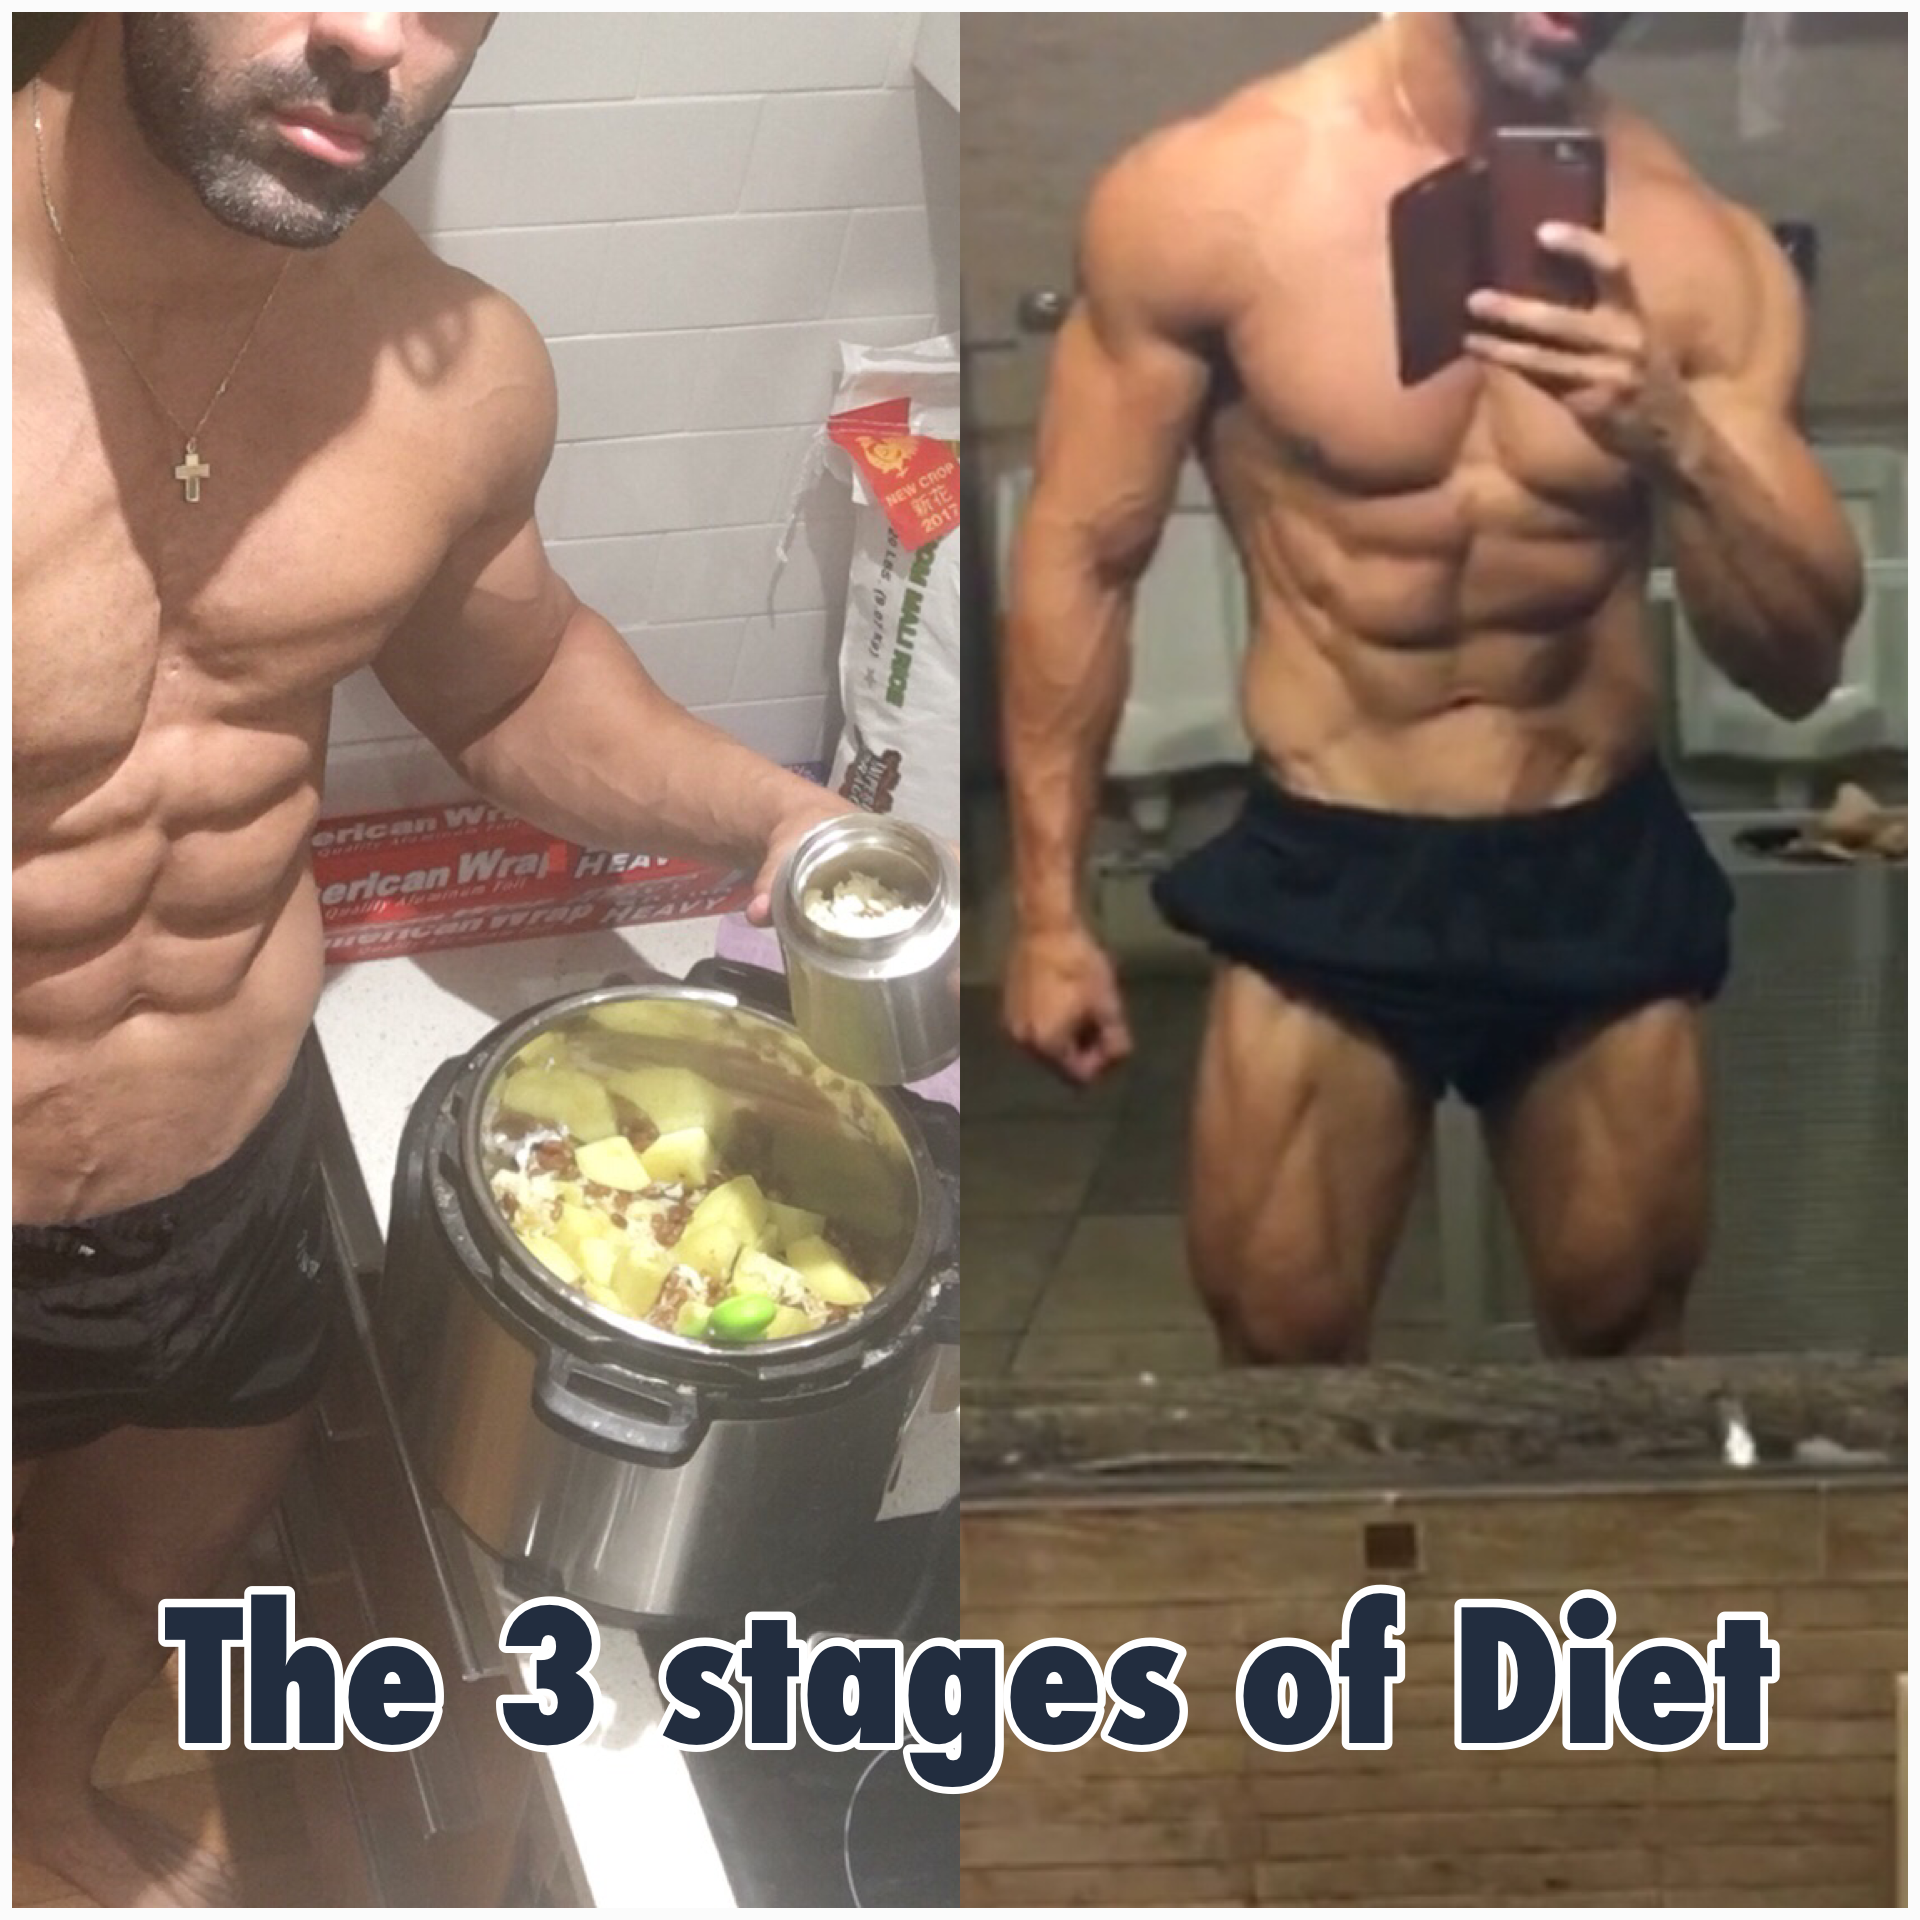 Muscle meals: The 3 stages to your dream body. Must read!